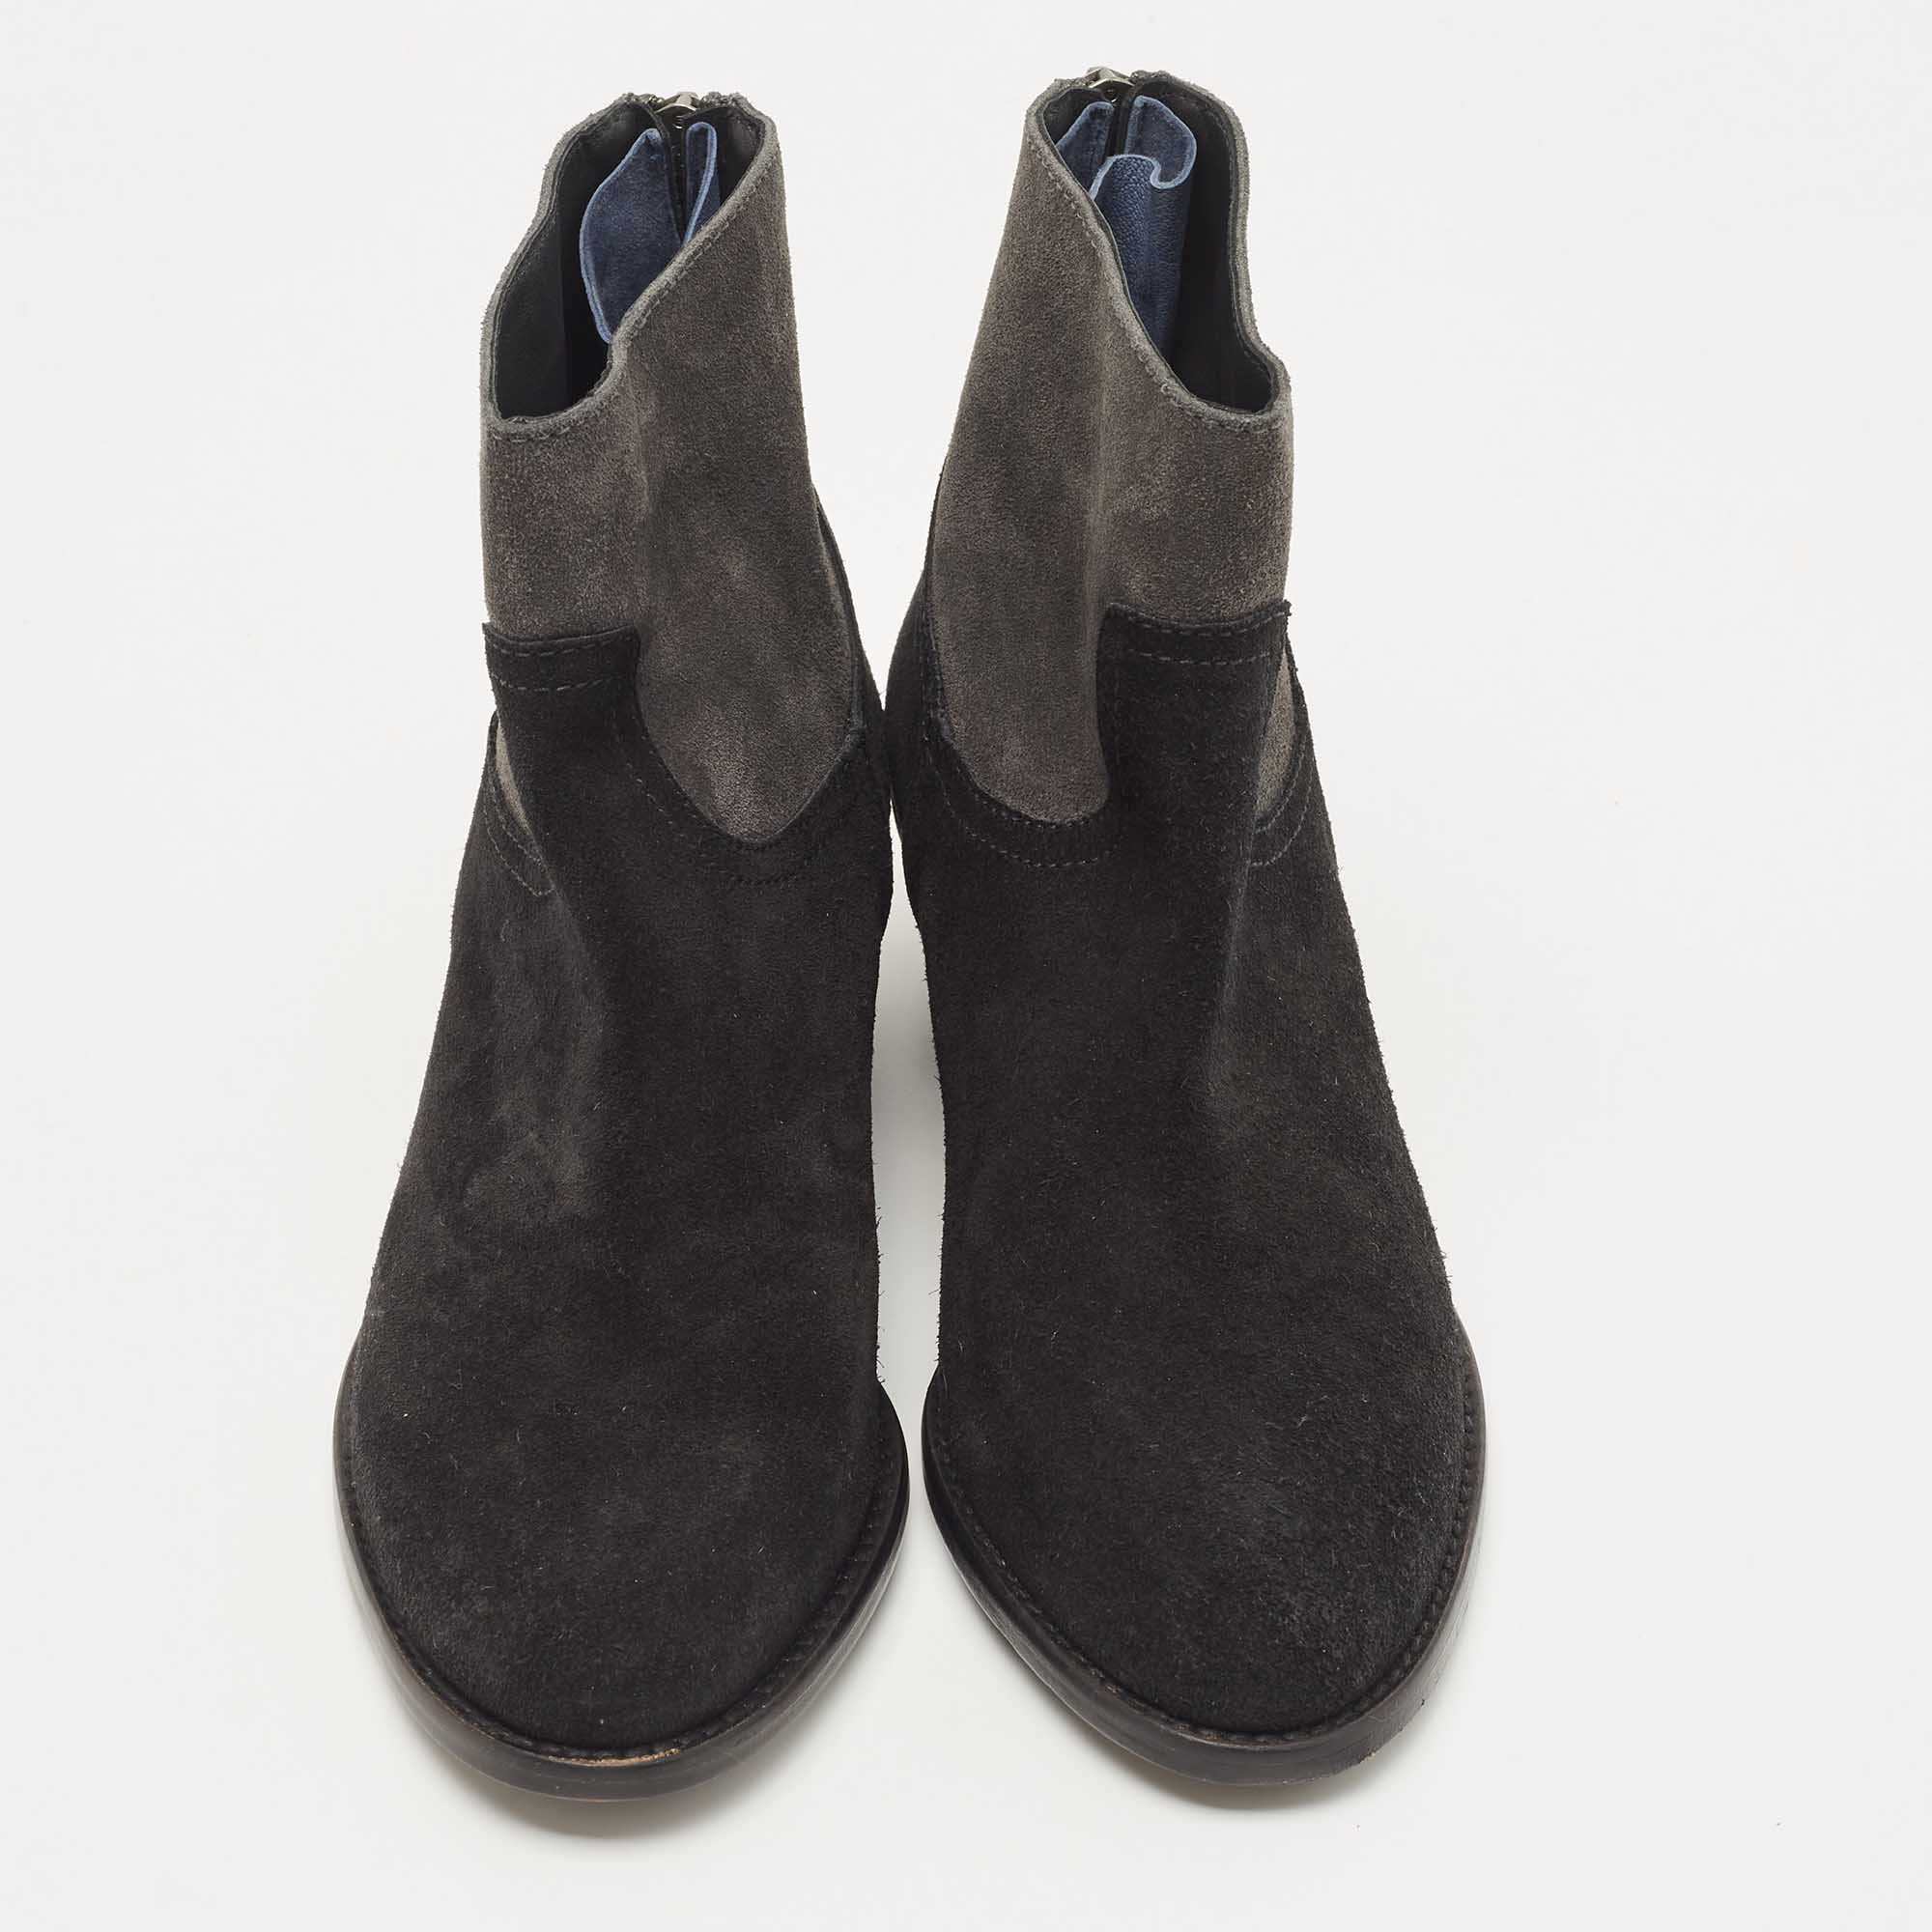 Zadig & Voltaire Black Suede Teddy Ankle Boots Size 36